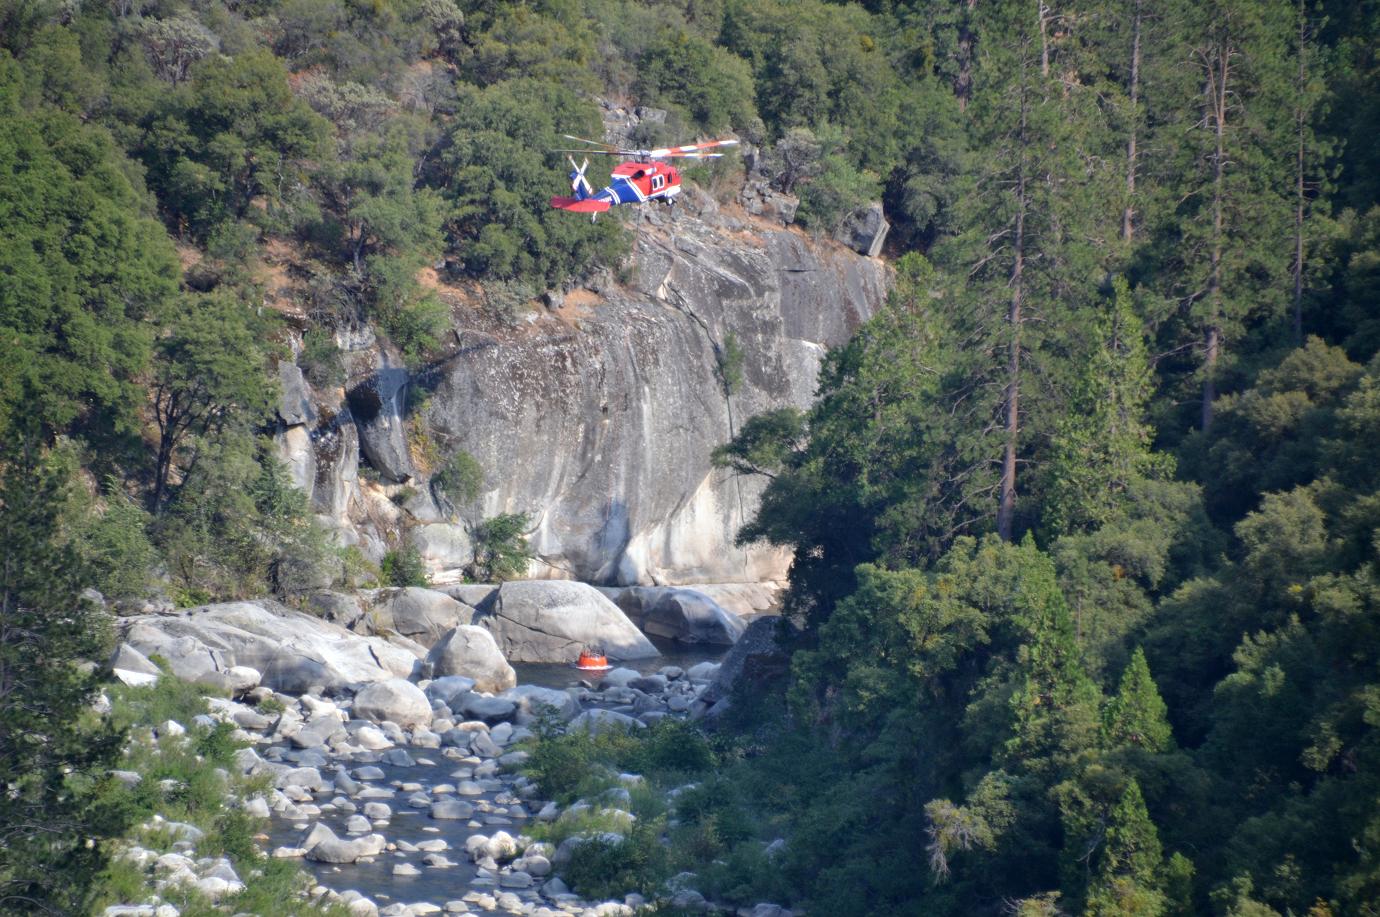 Helicopter gets water from San Joaquin at Rock Creek - photo by Gina Clugston